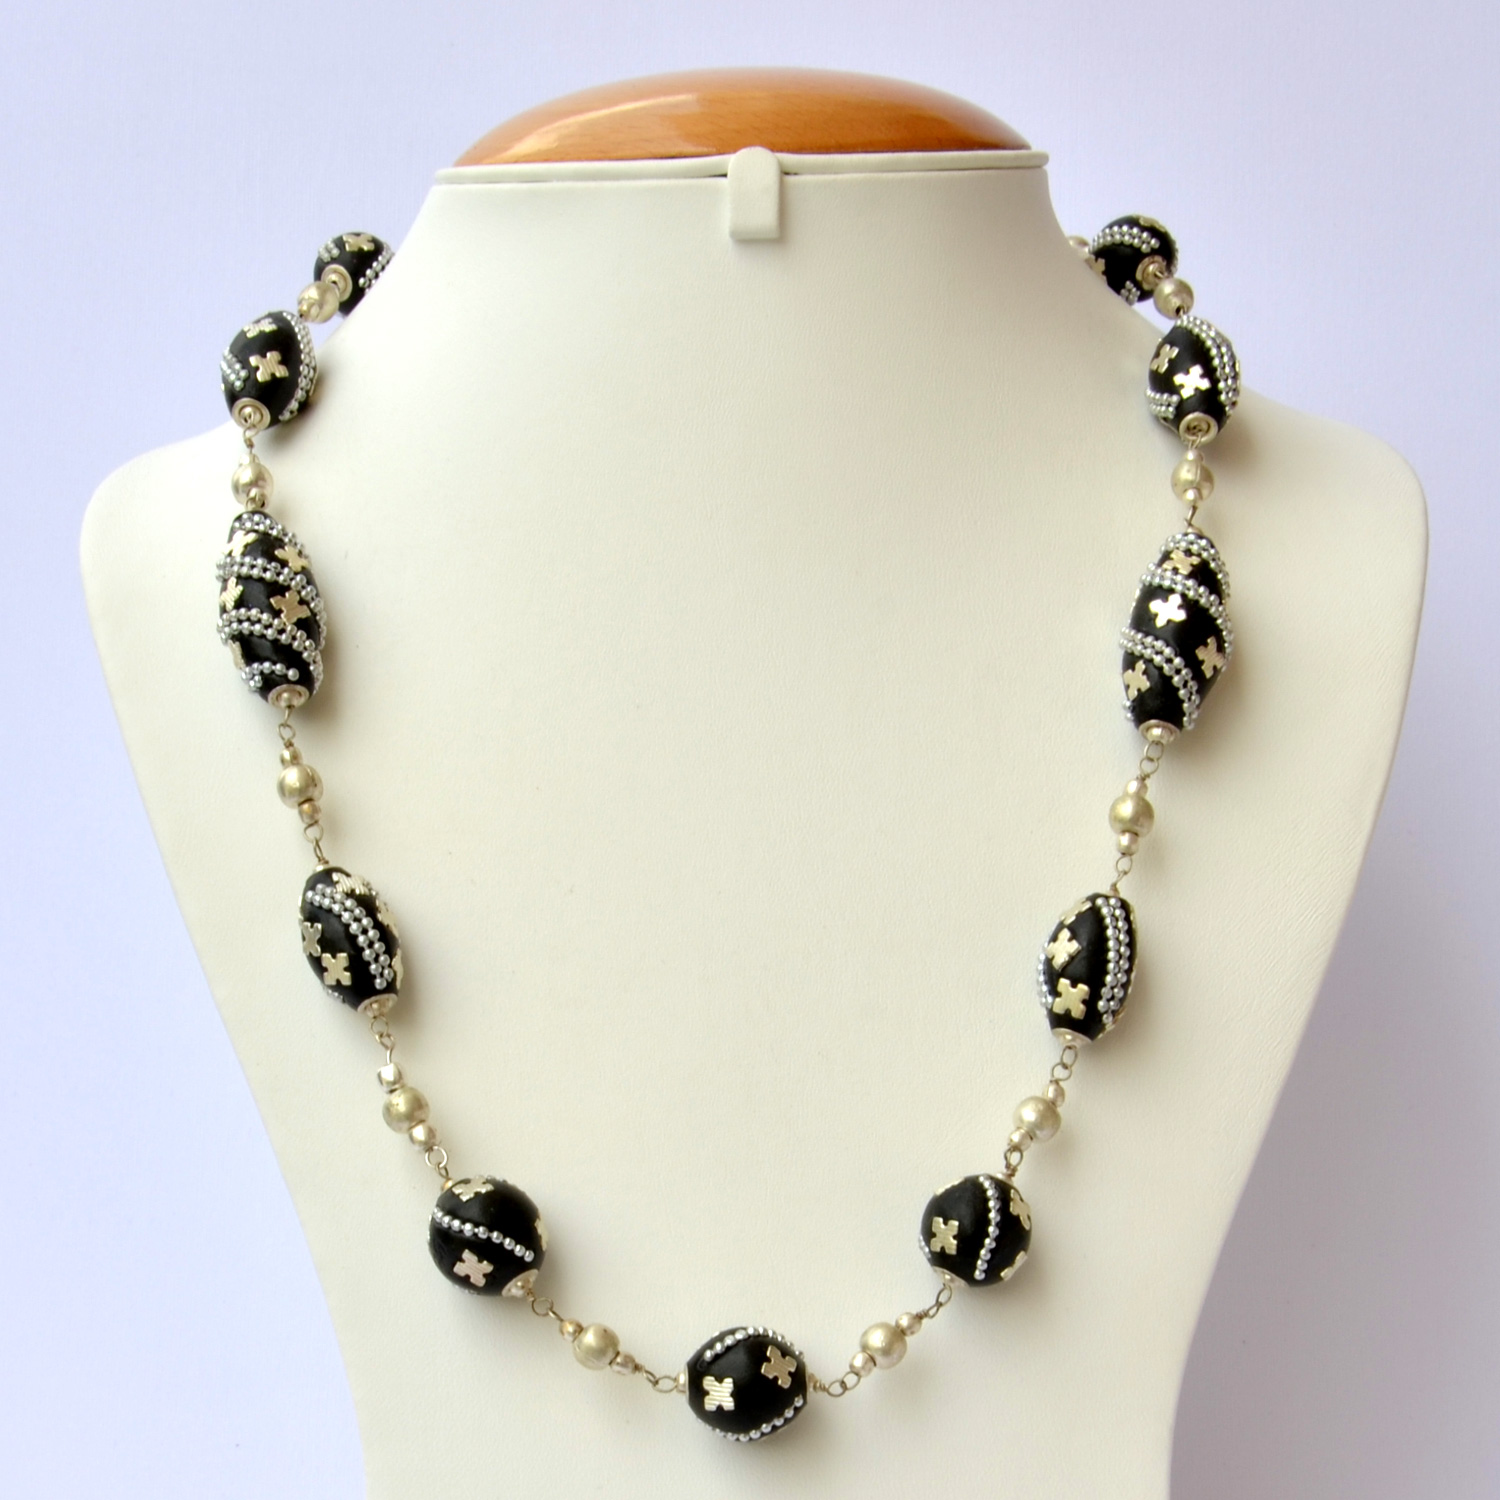 Handmade Black Necklace Studded with Metal Chain & Accessories | Maruti ...